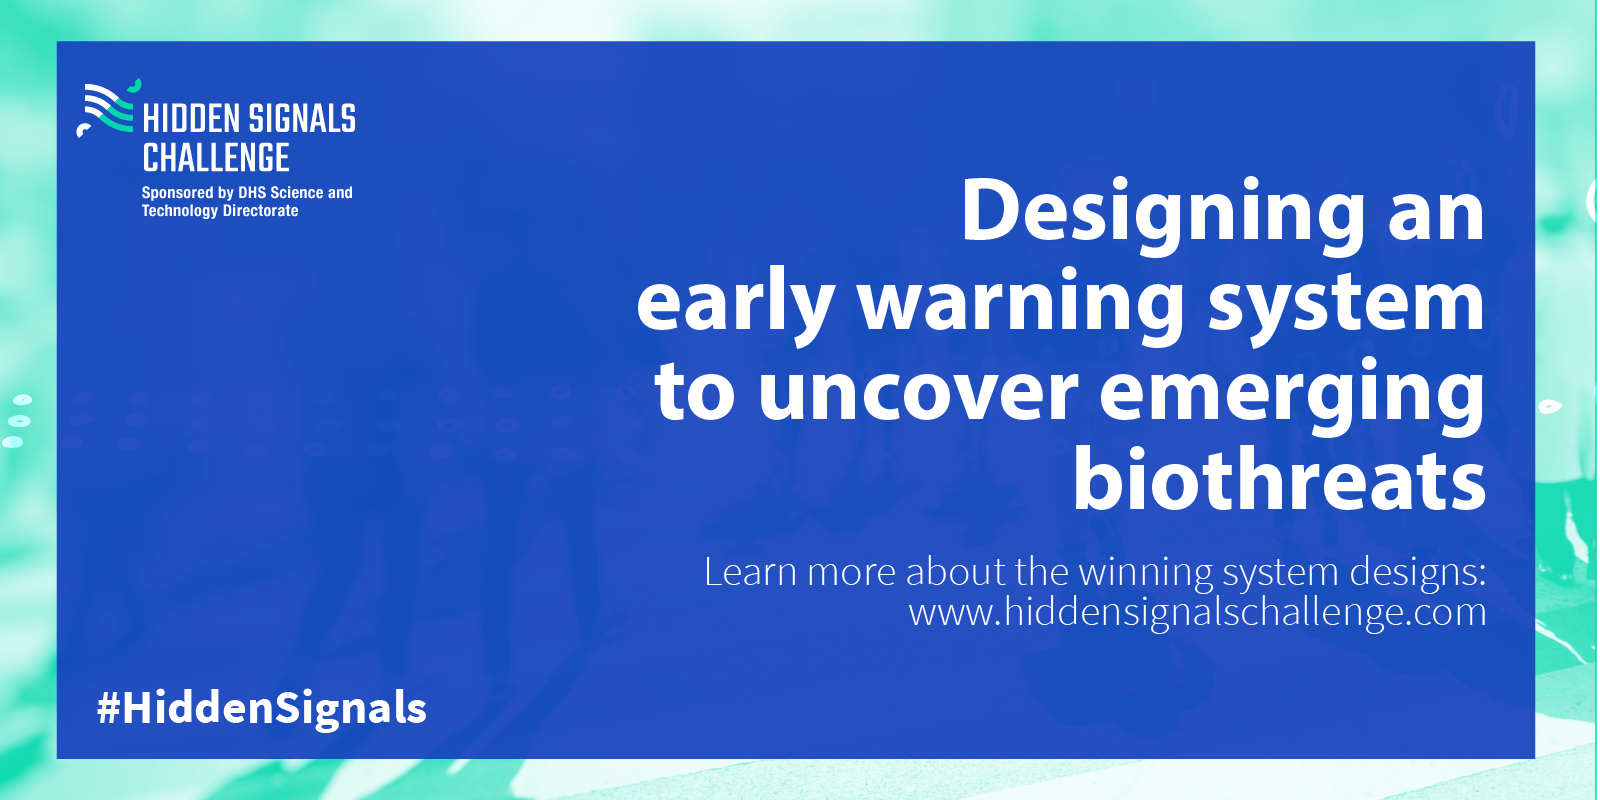 Hidden Signals Challenge. Designing an early warning system to uncover emerging biothreats. Learn more about the winning system designs: www.hiddensignalschallenge.com; #HiddenSignals.